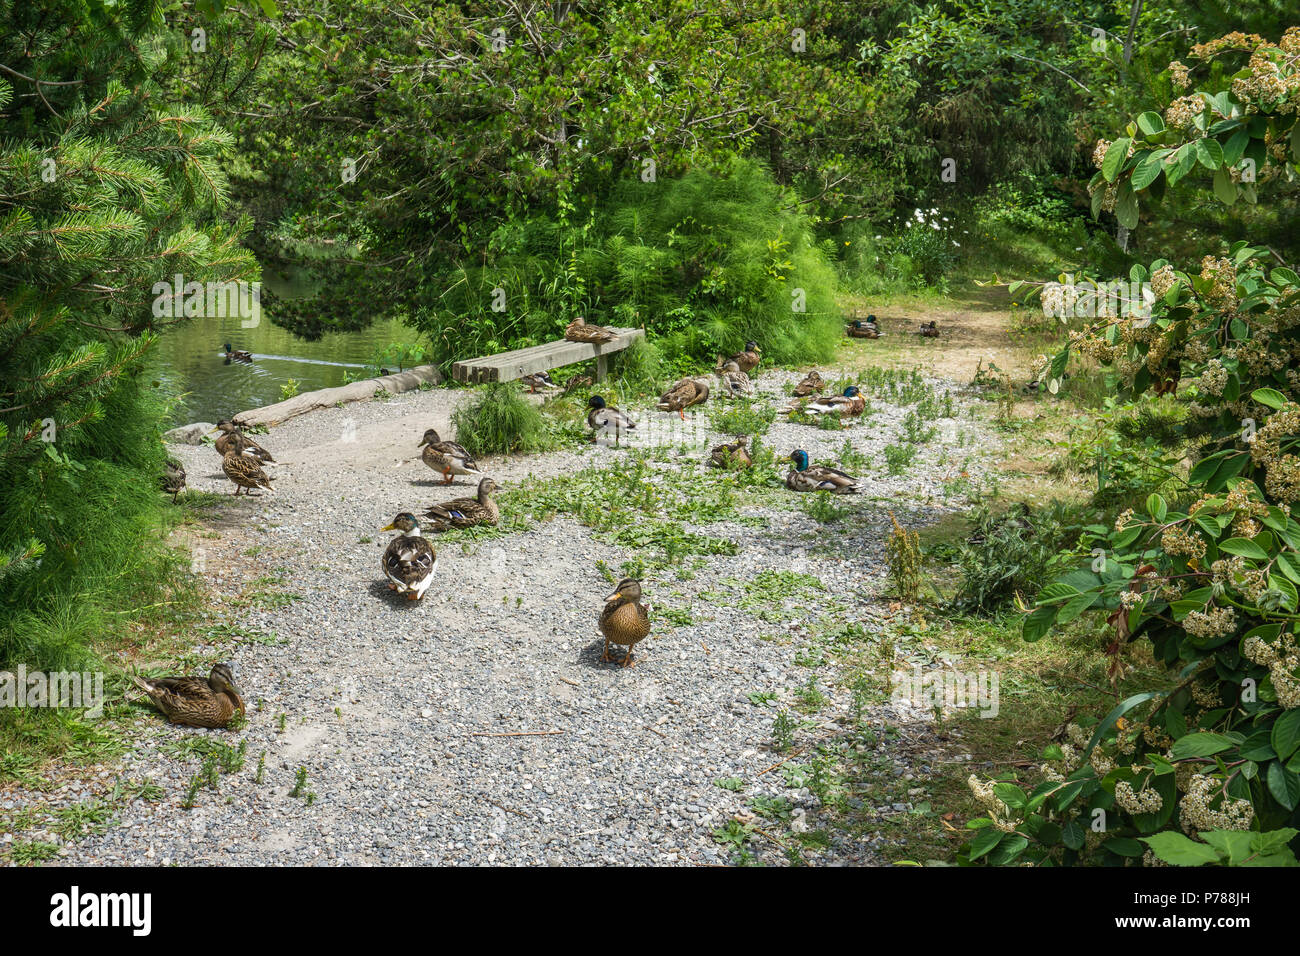 It is nap time for thsee ducks in Normandy Park, Washington. Stock Photo